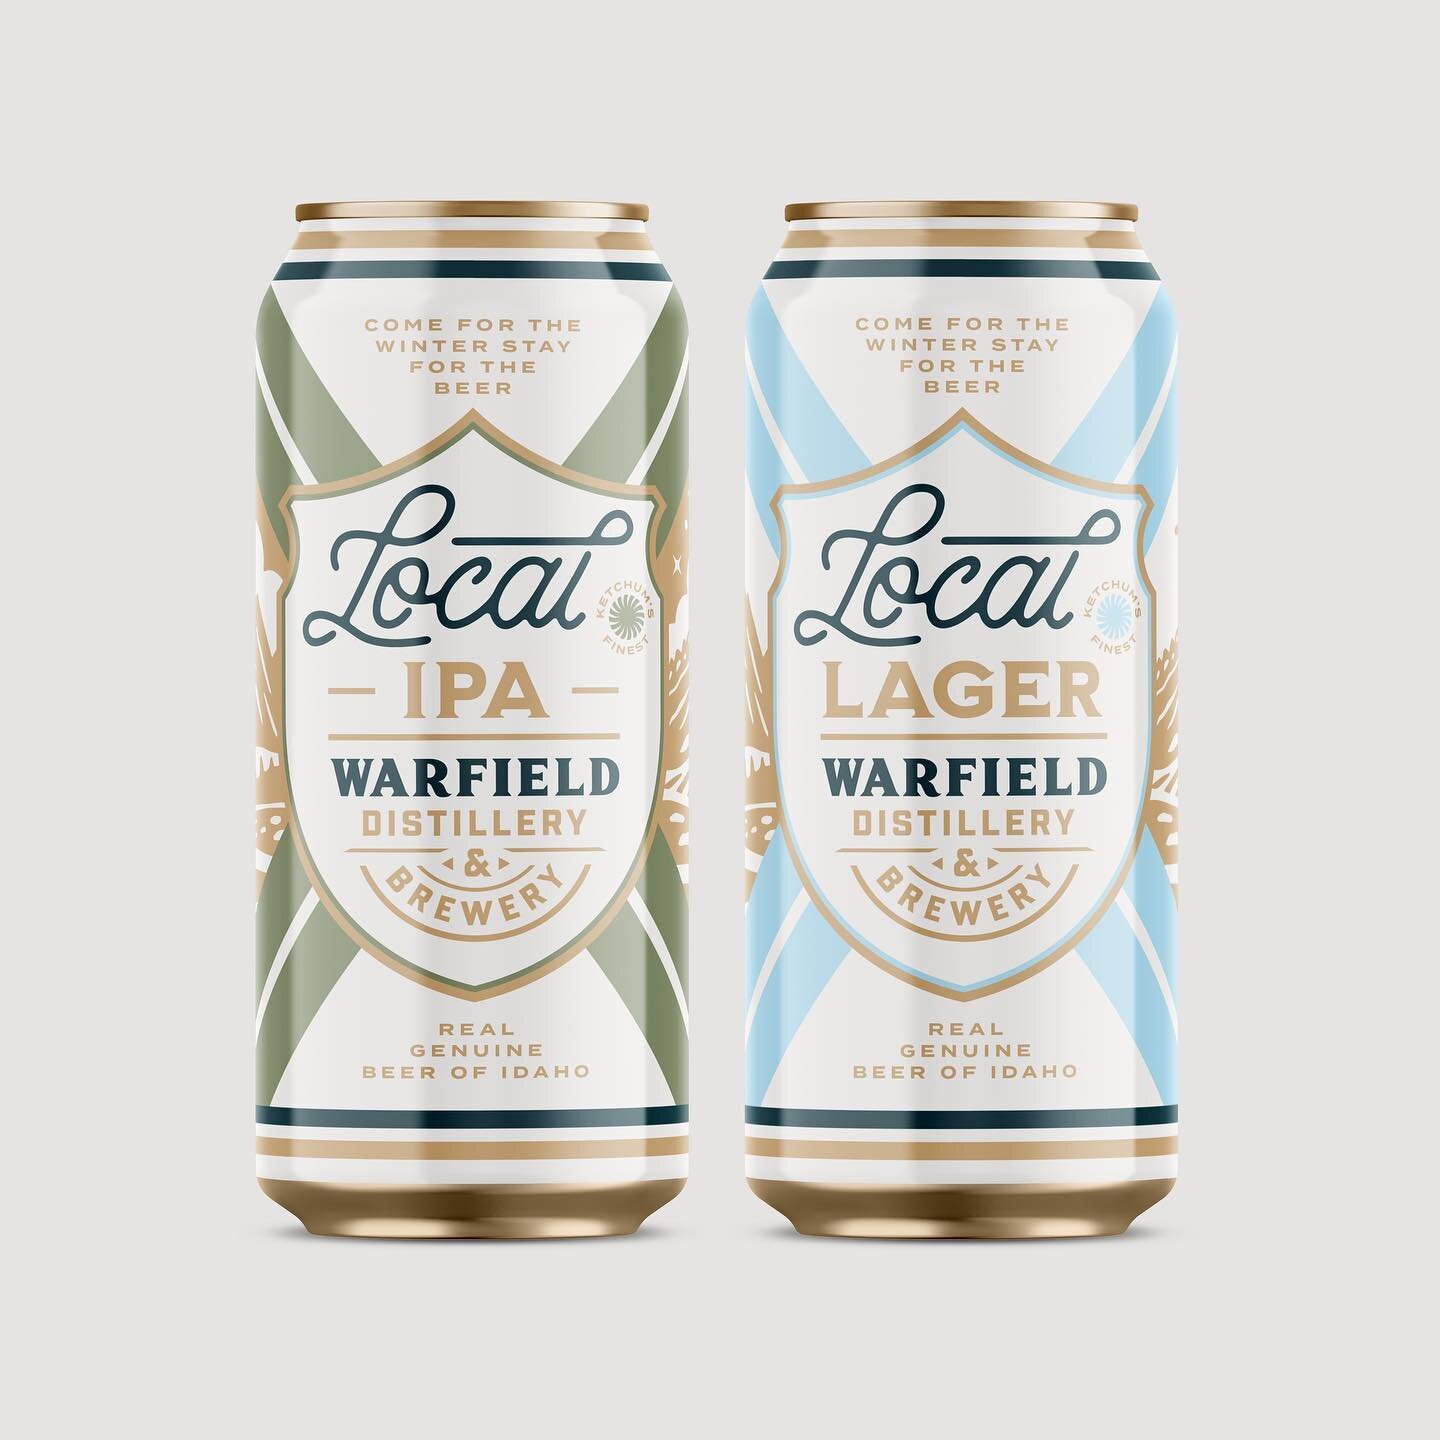 Packaging design for @warfield_idaho local beer series featuring an IPA and a lager. The packaging is inspired by the simple designs and straight forward messaging of vintage beer cans that your Grandpappy would drink. Real genuine organic beer of Id